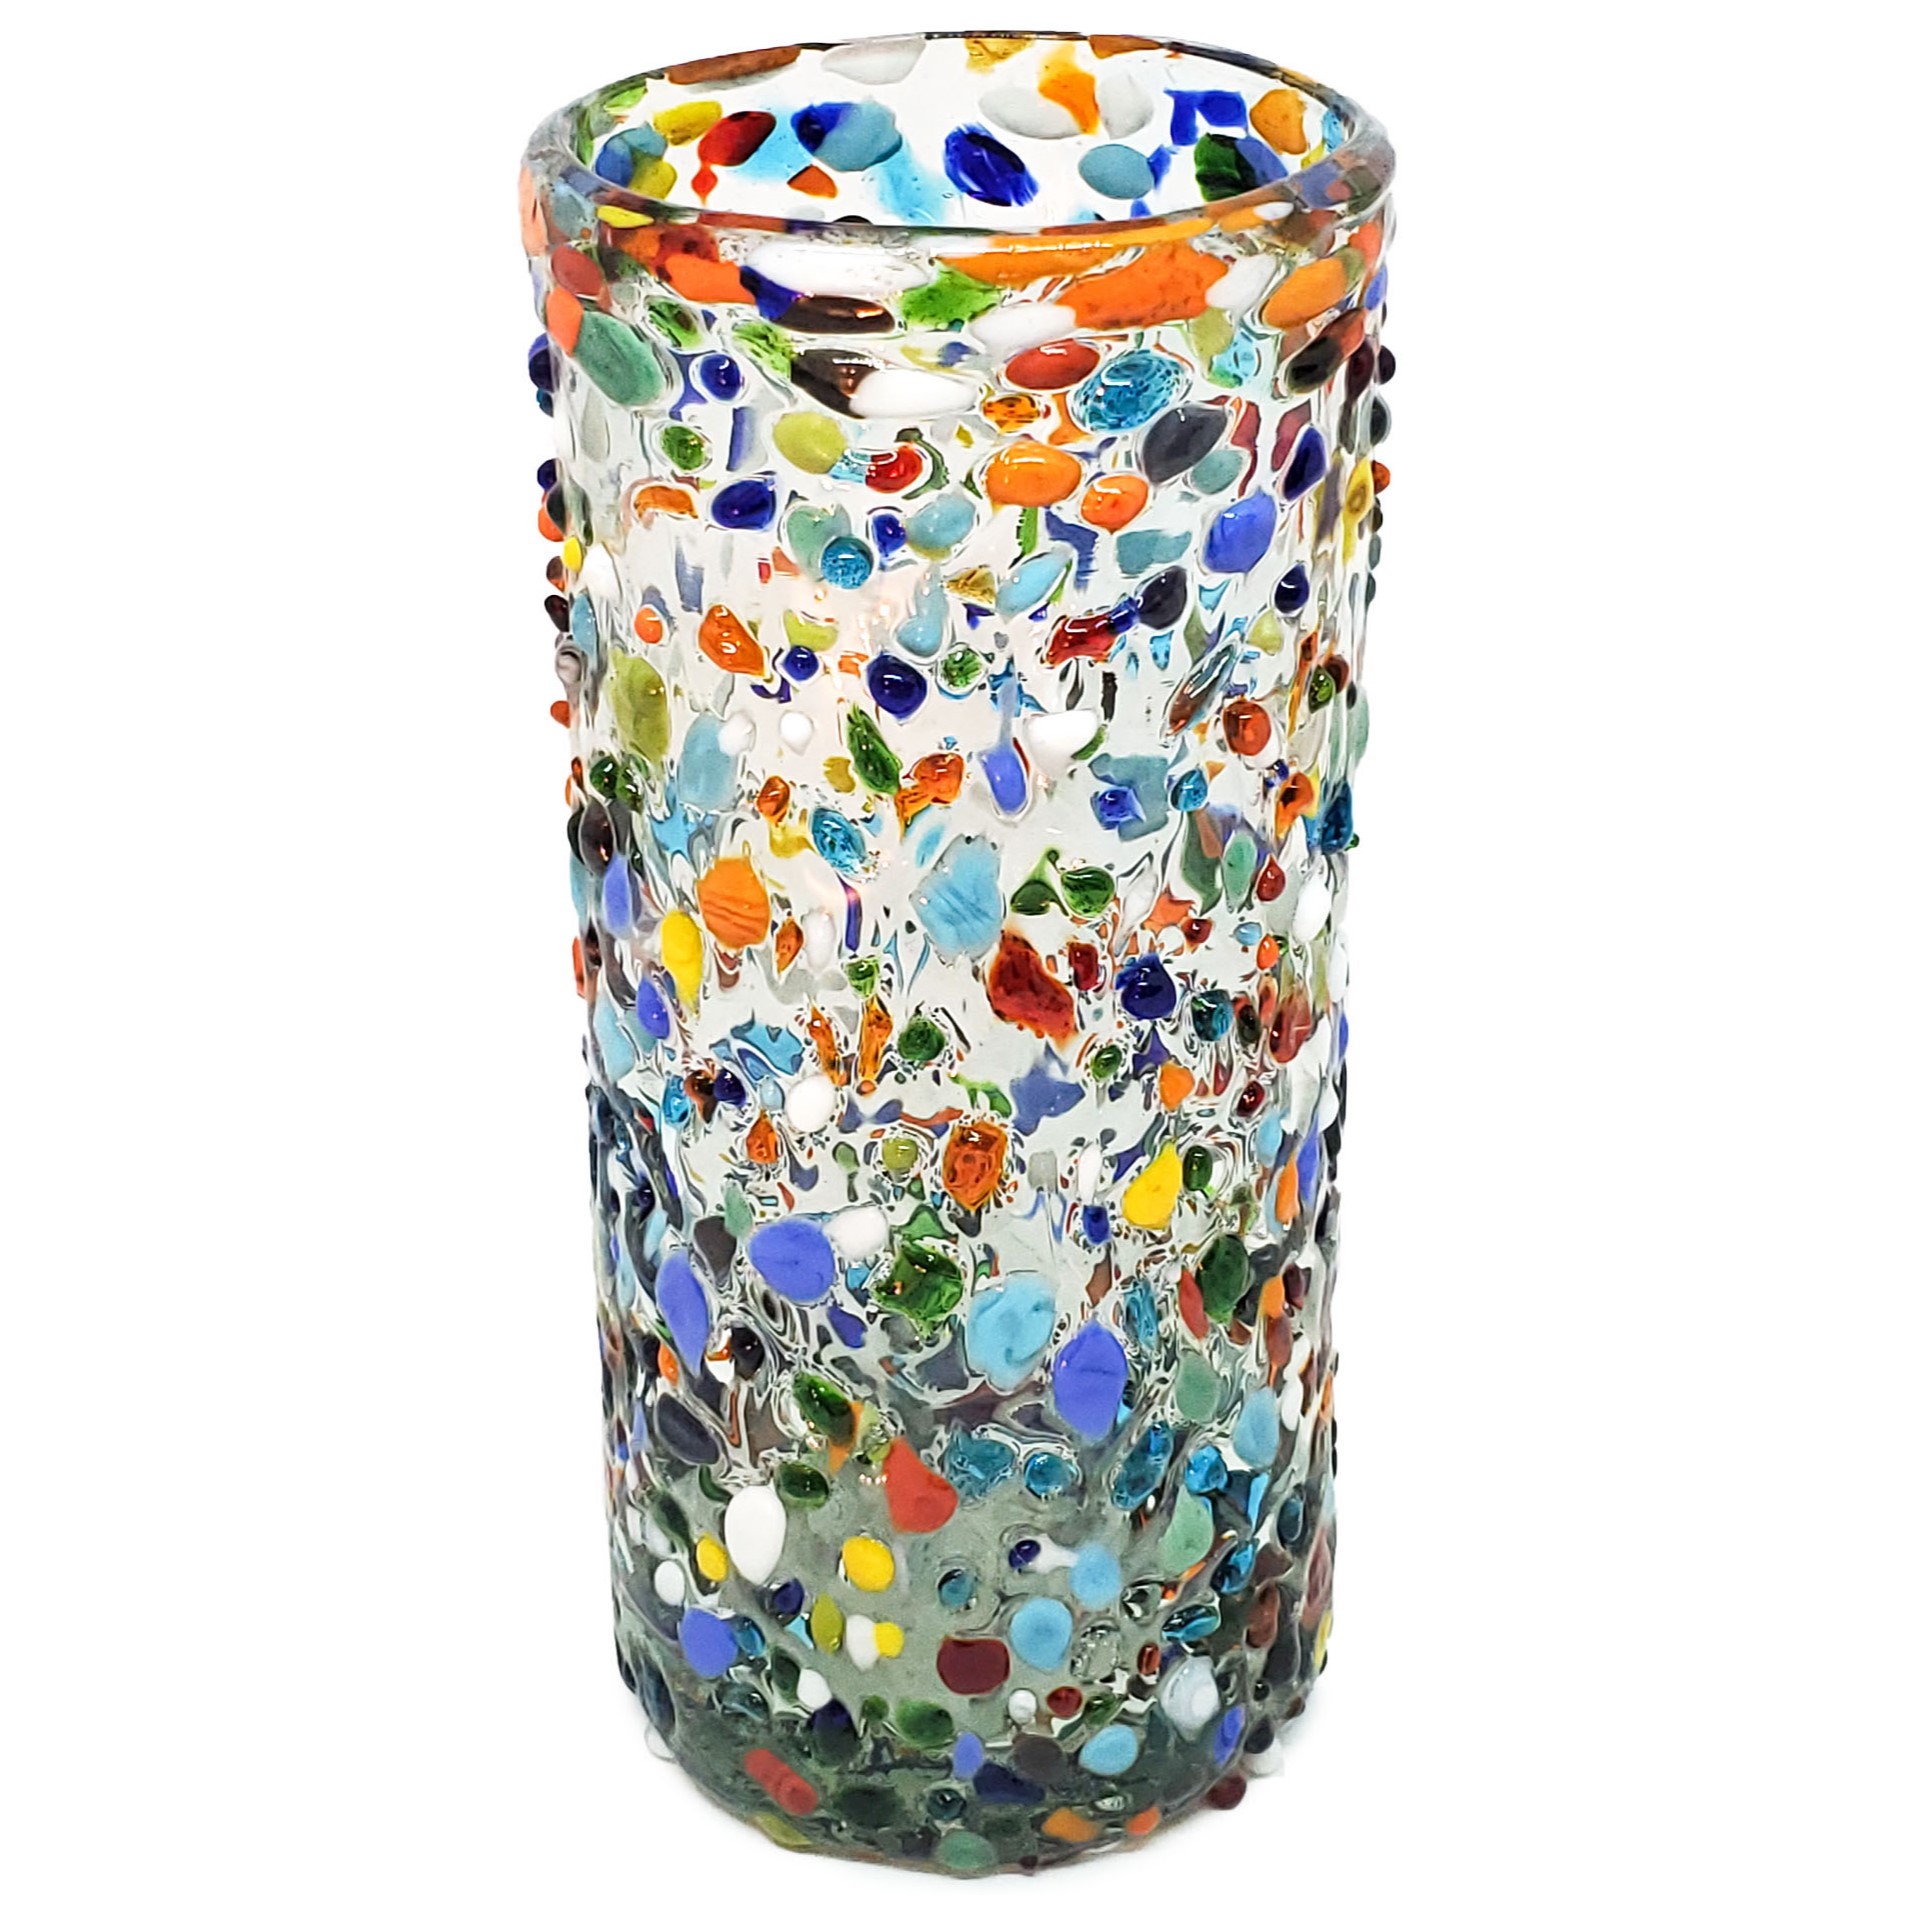 Wholesale MEXICAN GLASSWARE / Confetti Rocks 20 oz Tall Iced Tea Glasses  / Let the spring come into your home with this colorful set of glasses. The multicolor glass rocks decoration makes them a standout in any place.